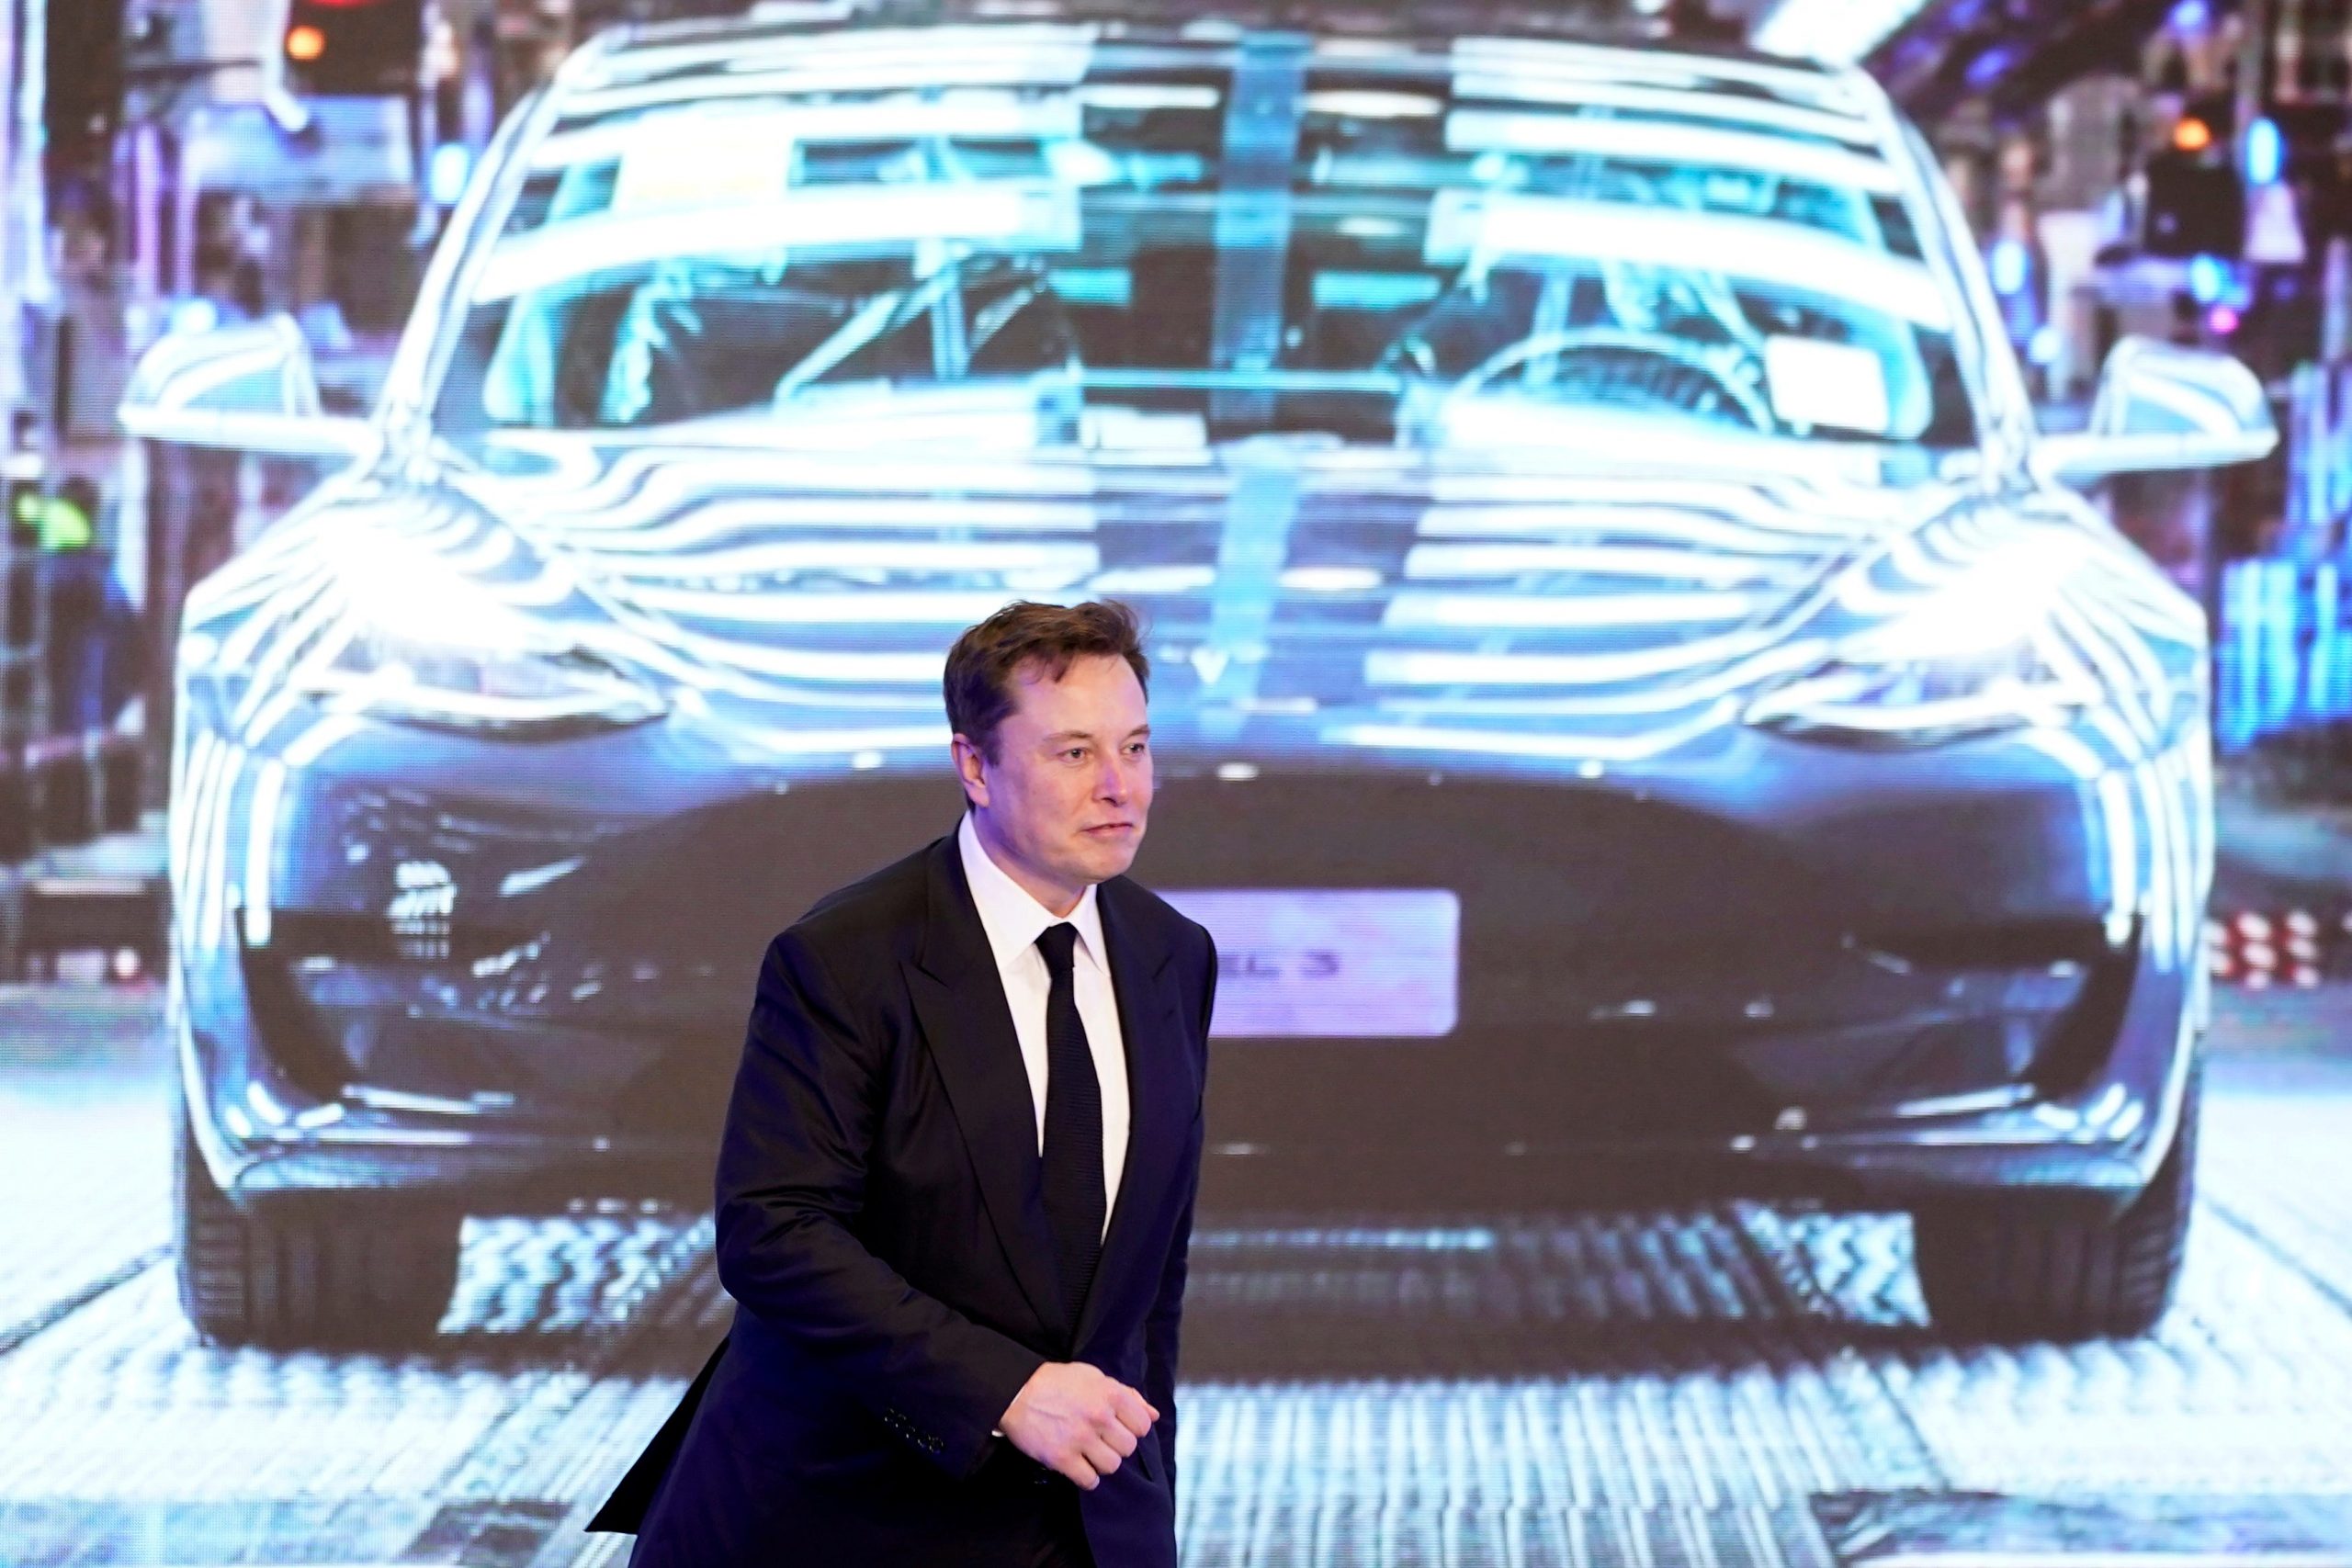 Tesla CEO Elon Musk in a black suit walks on stage in front of an image of a Model Y vehicle